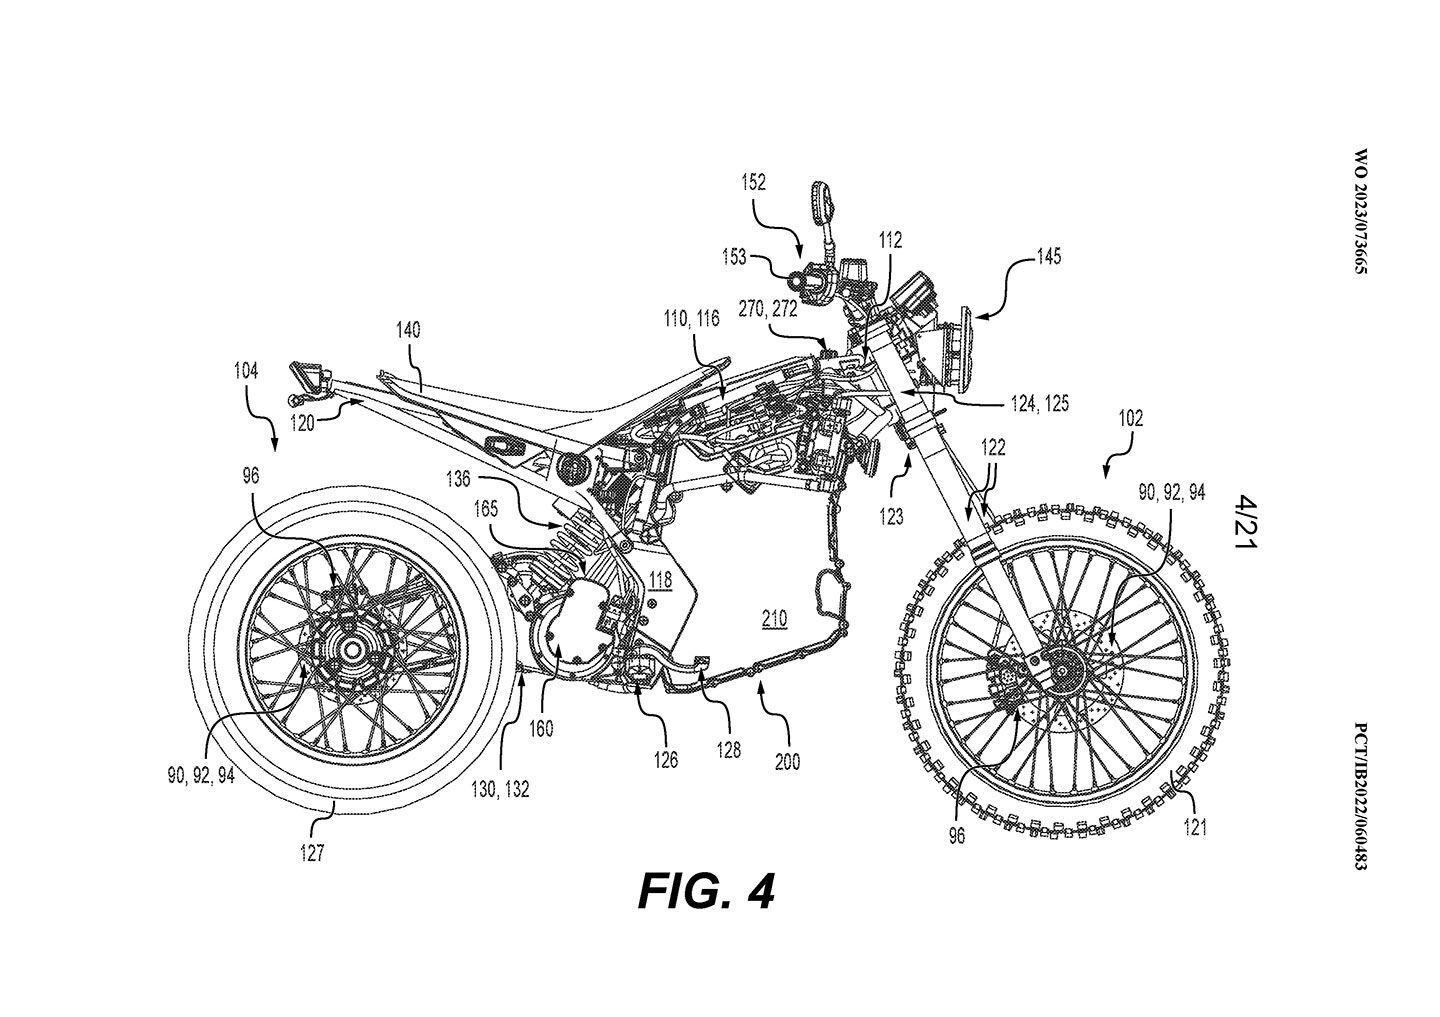 Patent illustrations of the Origin show the bike’s mechanical layout including the placement of components like the motor, final drive, and reduction gear.